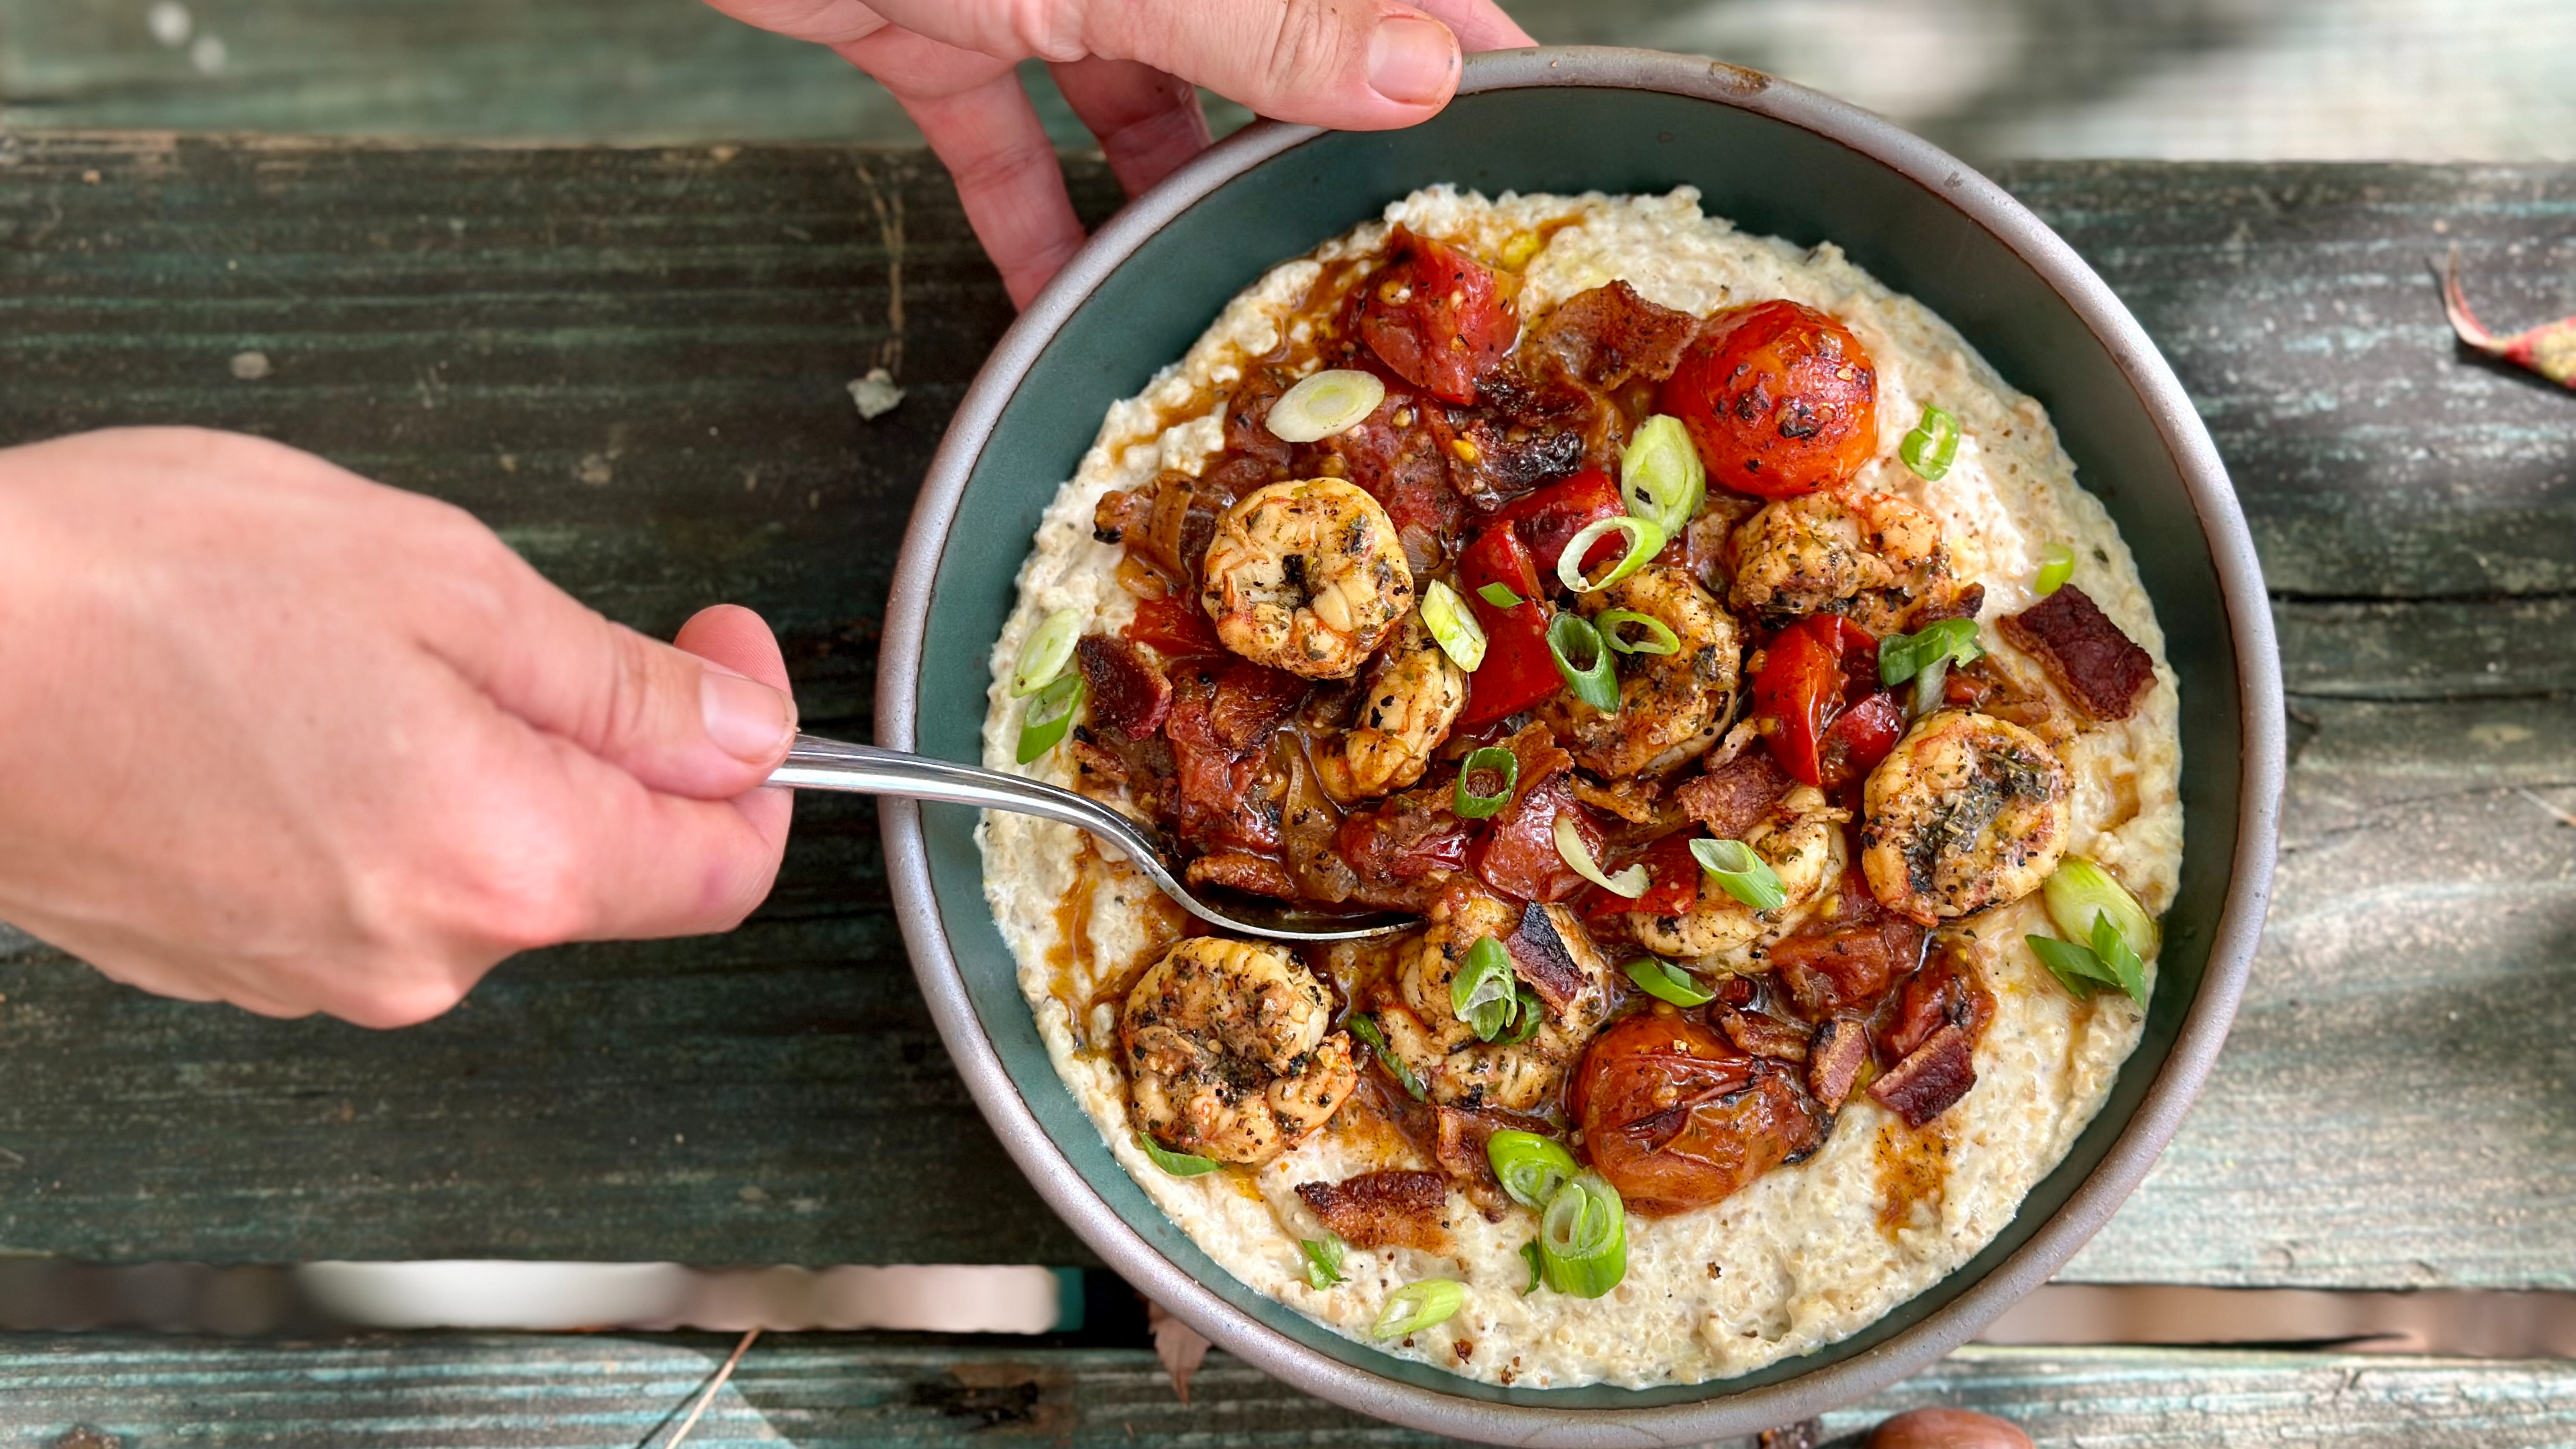 A bowl of creamy-looking grits topped with shrimp and sauce, with hands holding it and a wooden backdrop.